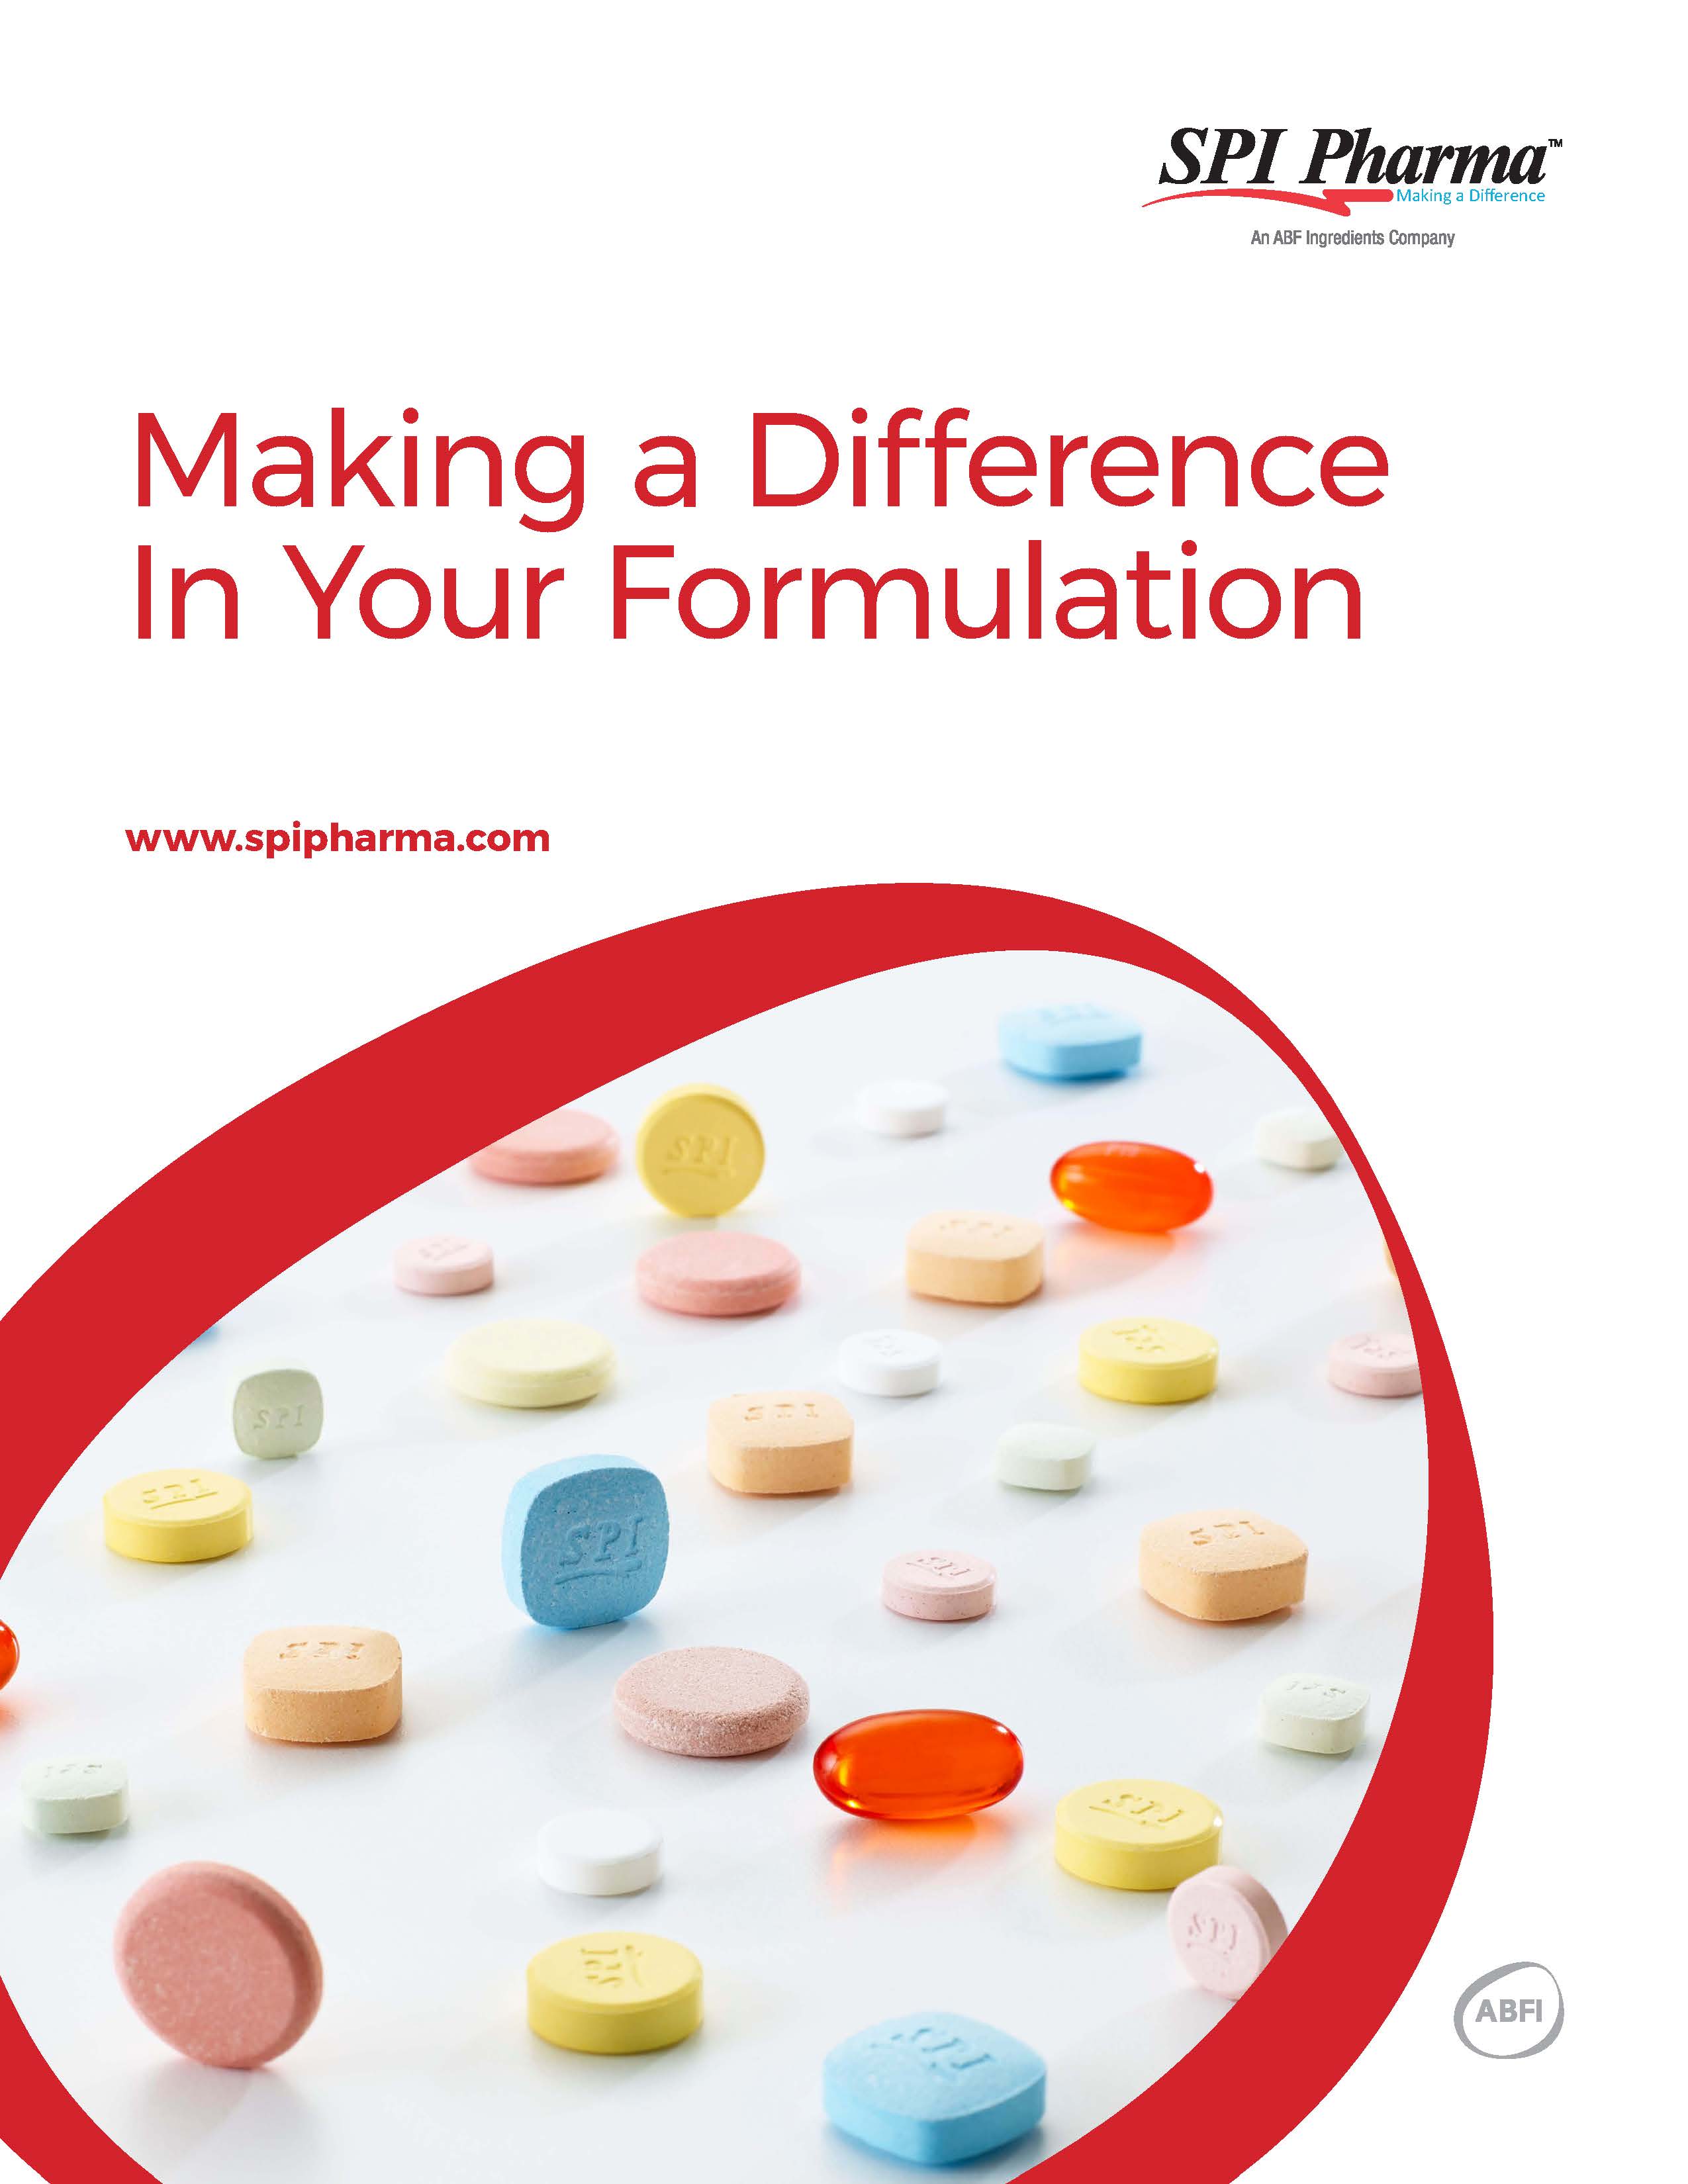 Making a Difference in Your Formulation